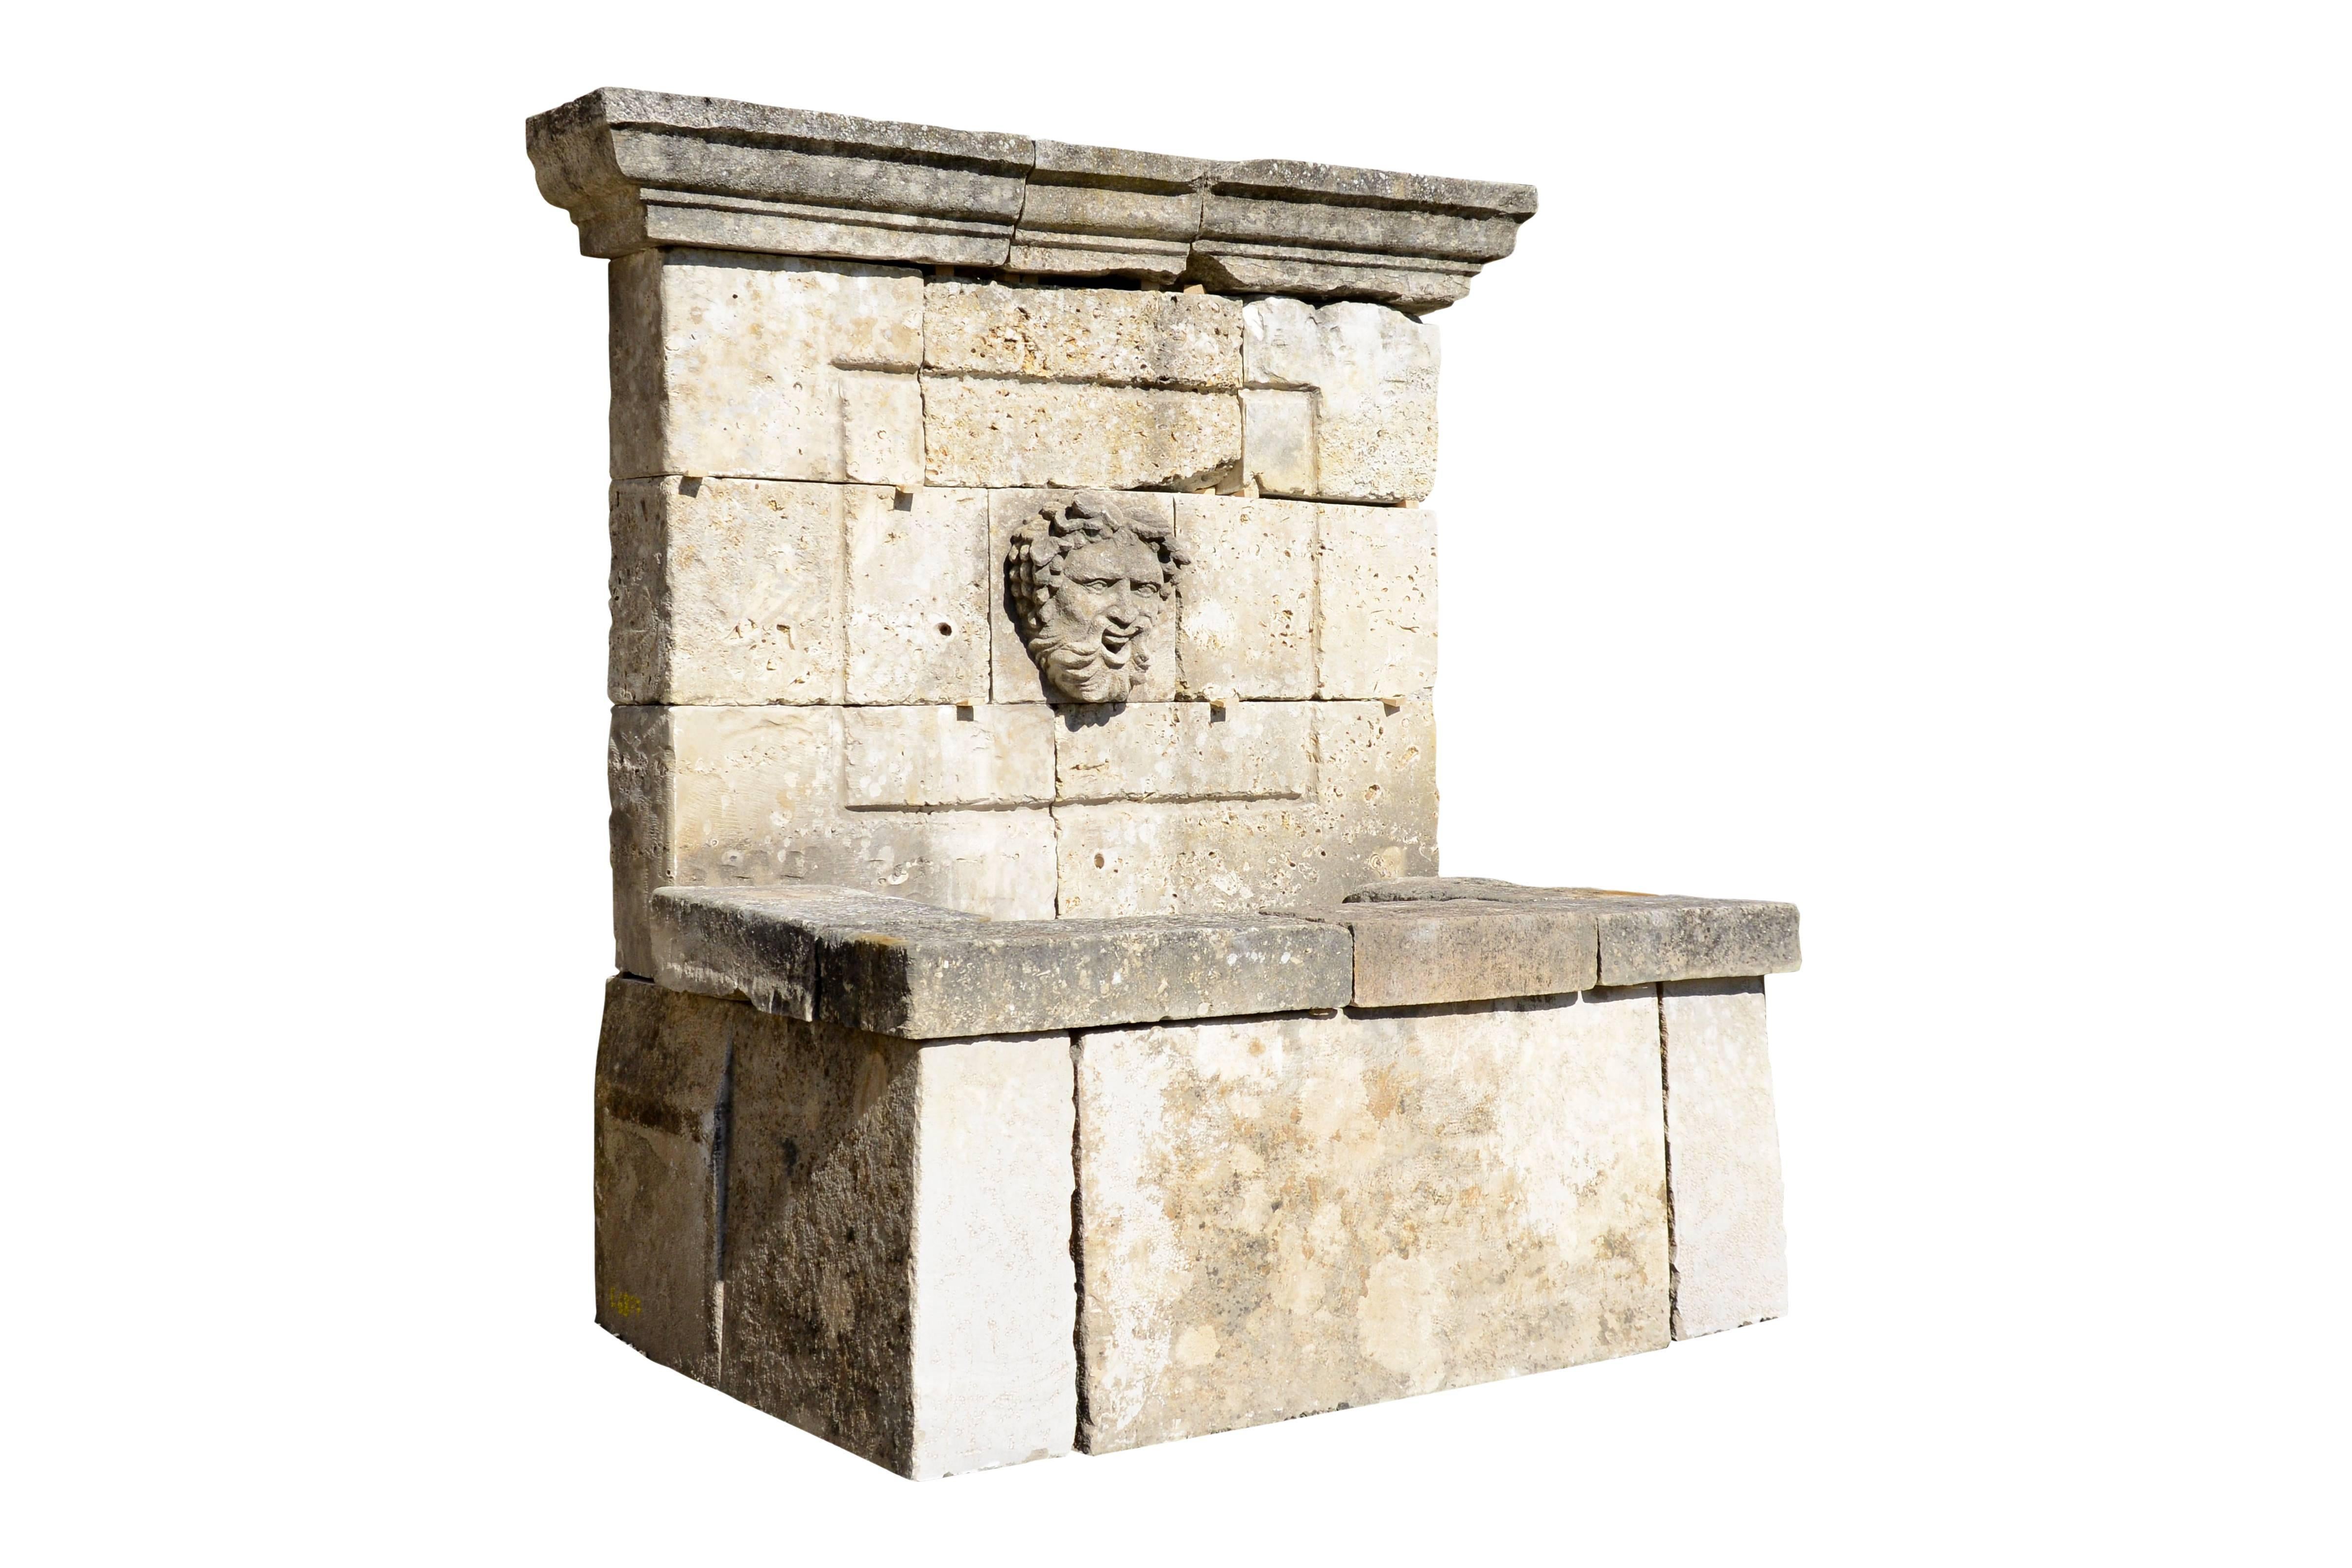 Composition of antique 19th century period reclaimed architectural elements forming a Provençal style wall fountain. The pediment, topped by a degrees cornice, is decorated with a moulded frame within which there is a carved mask.